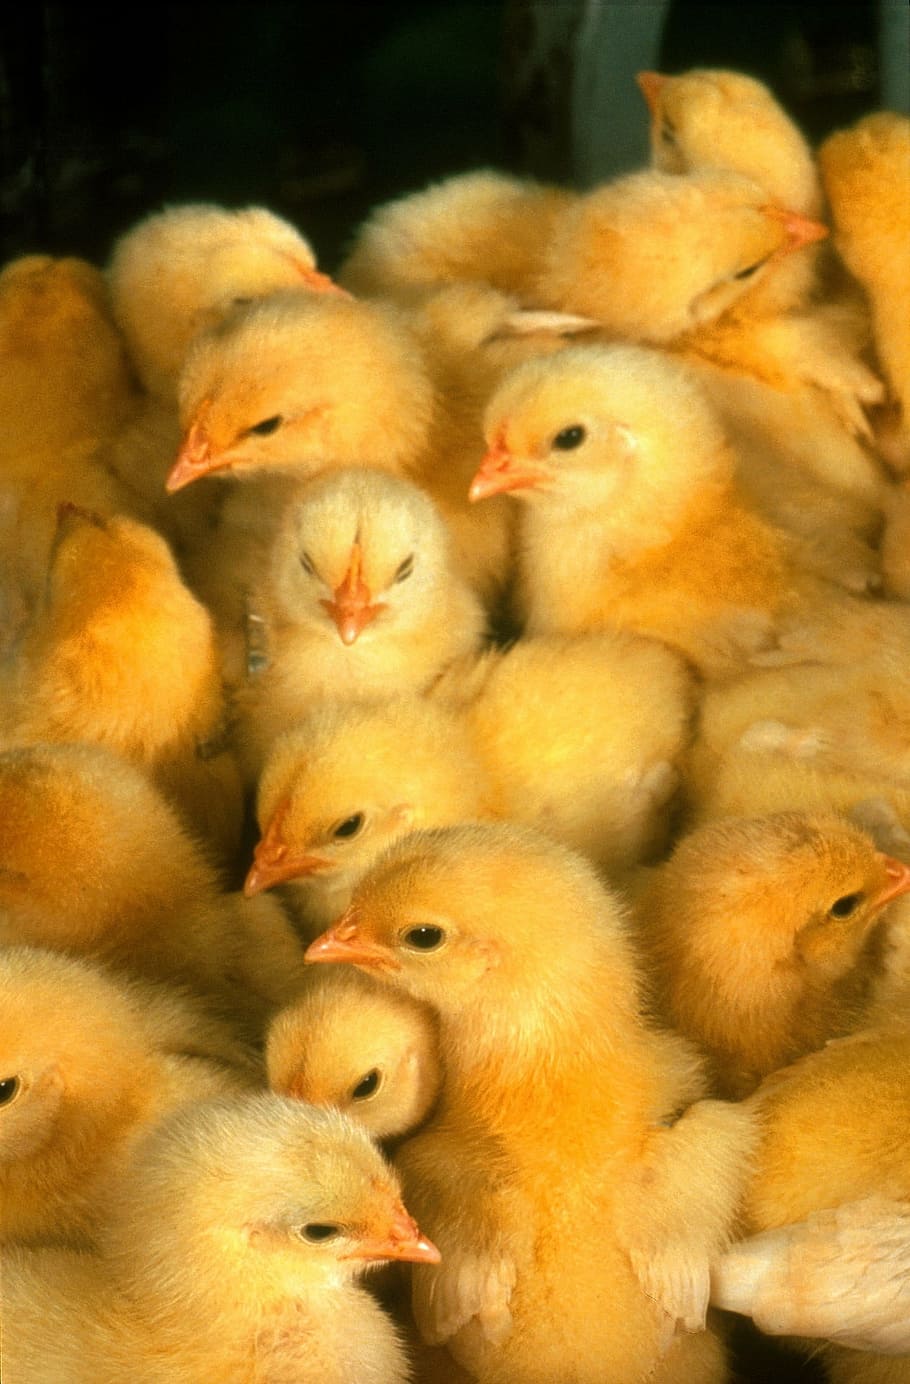 HD wallpaper: baby chickens, chicks, yellow, cute, small, young